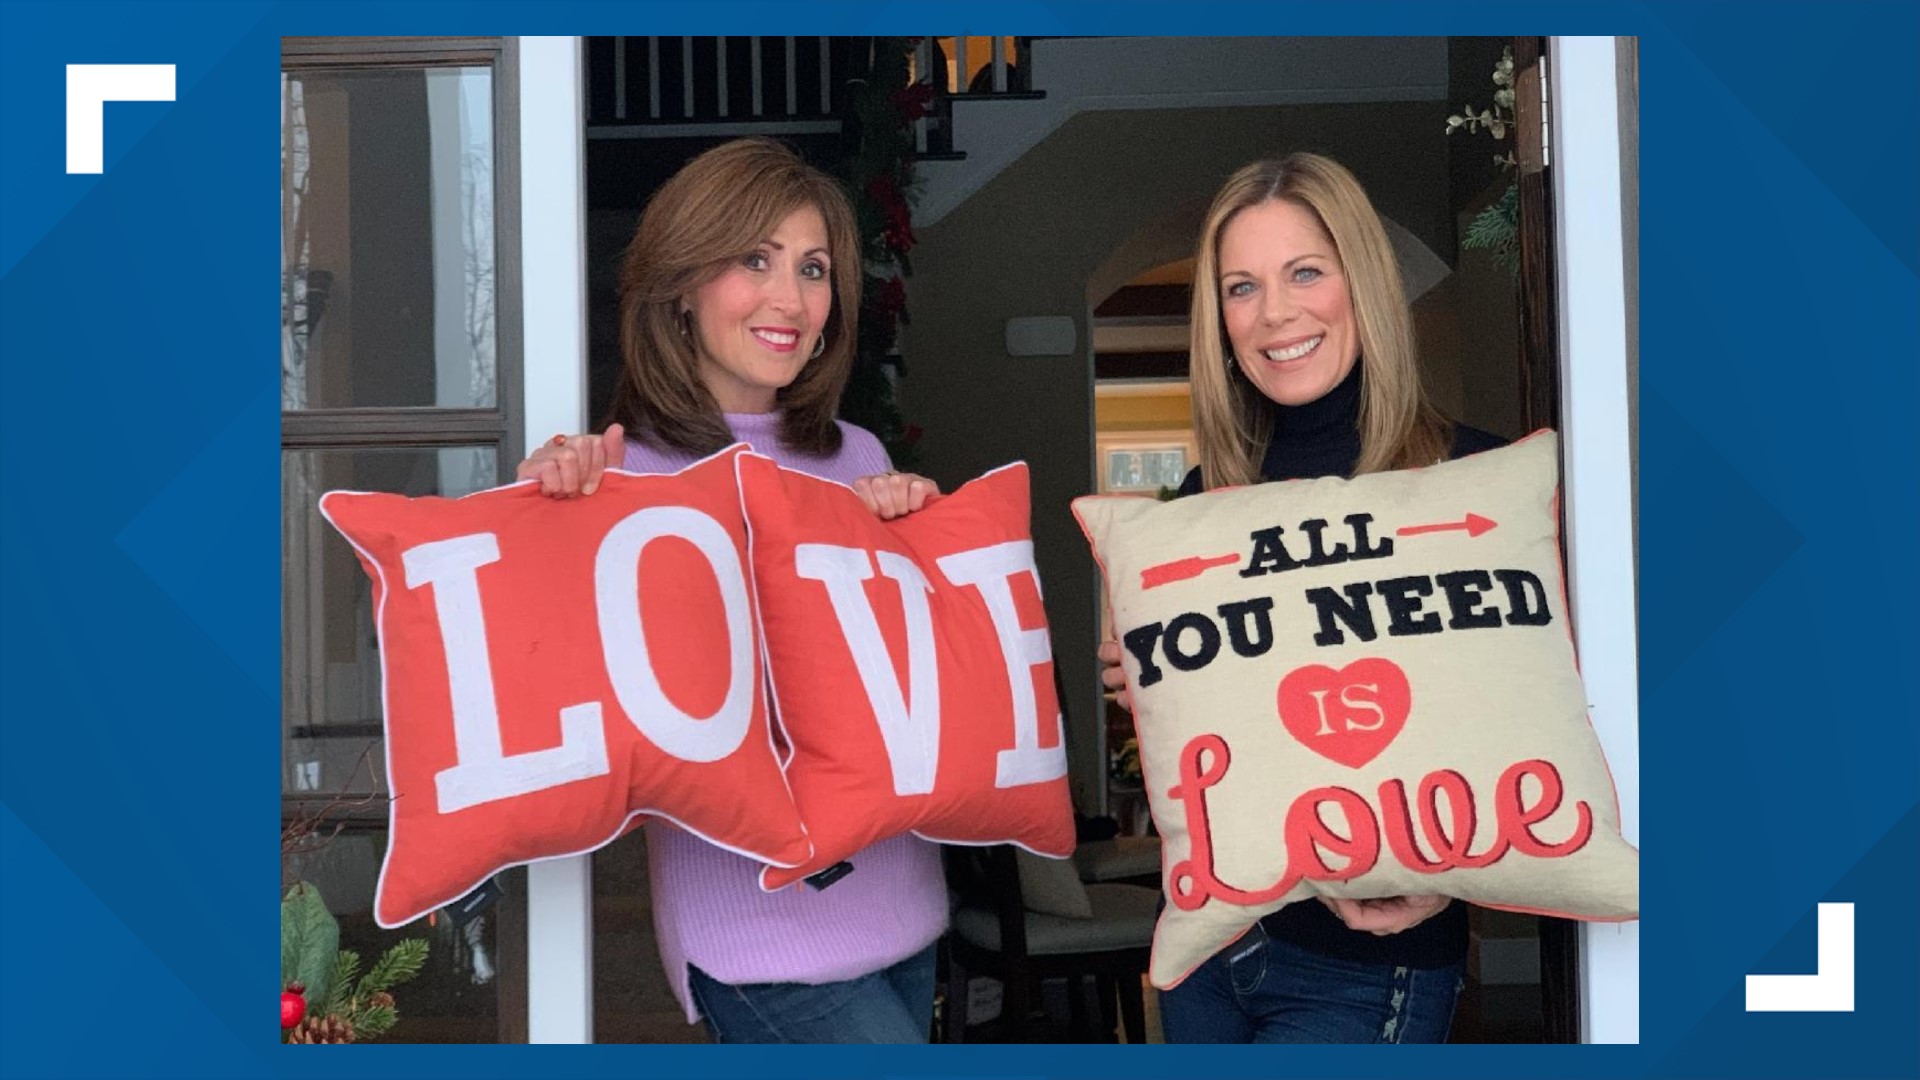 "Dating in your 50s," sounds like a game show and in some regards it is a game, according to the chicks from Chick2Chick, Flora Posteraro and Carrie Perry.